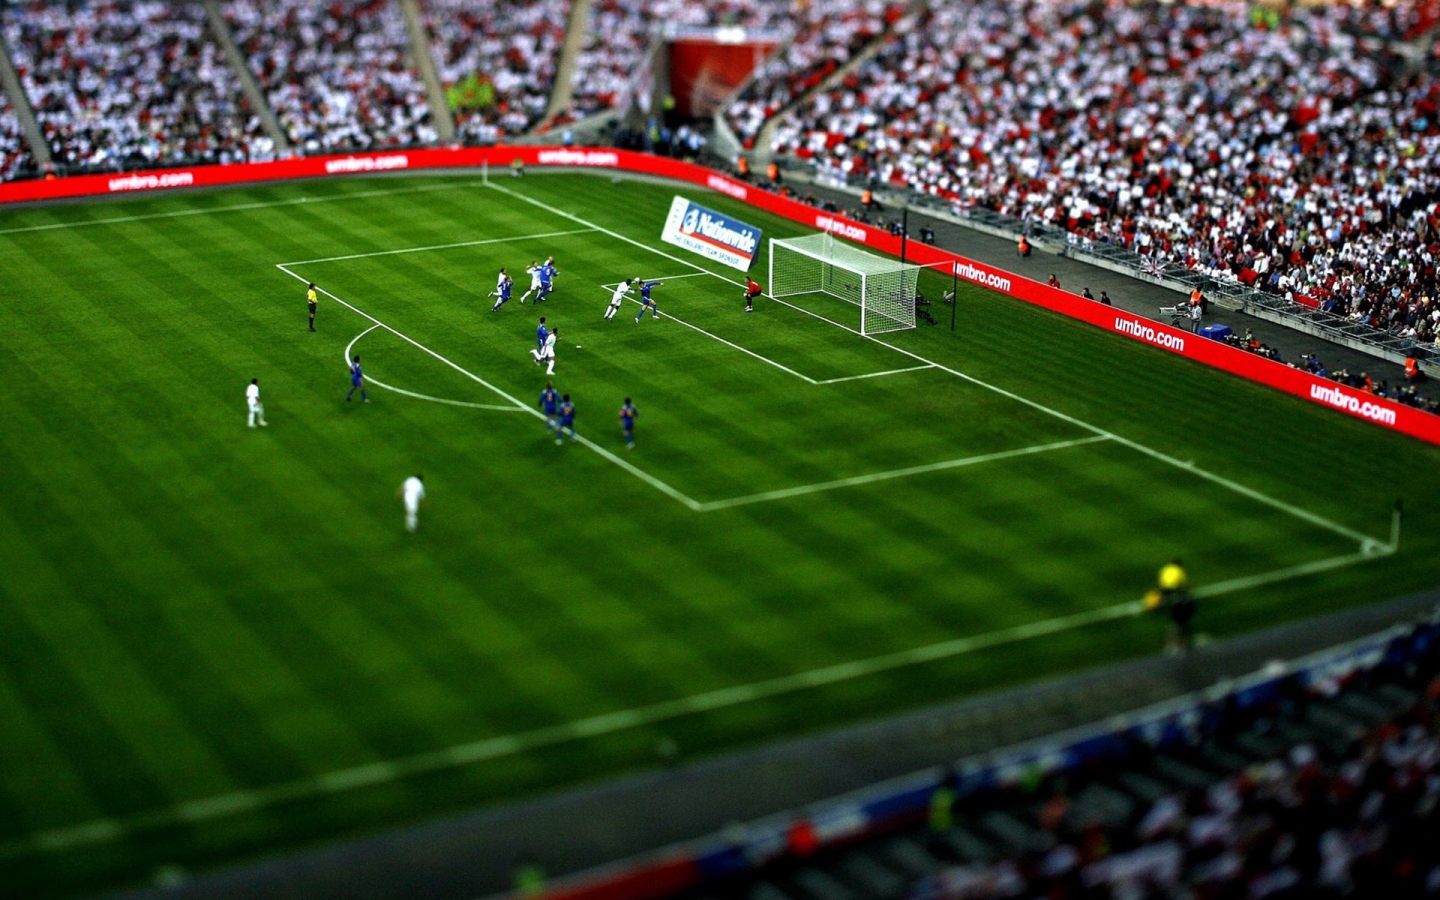 Stadium Toy Effect for 1440 x 900 widescreen resolution